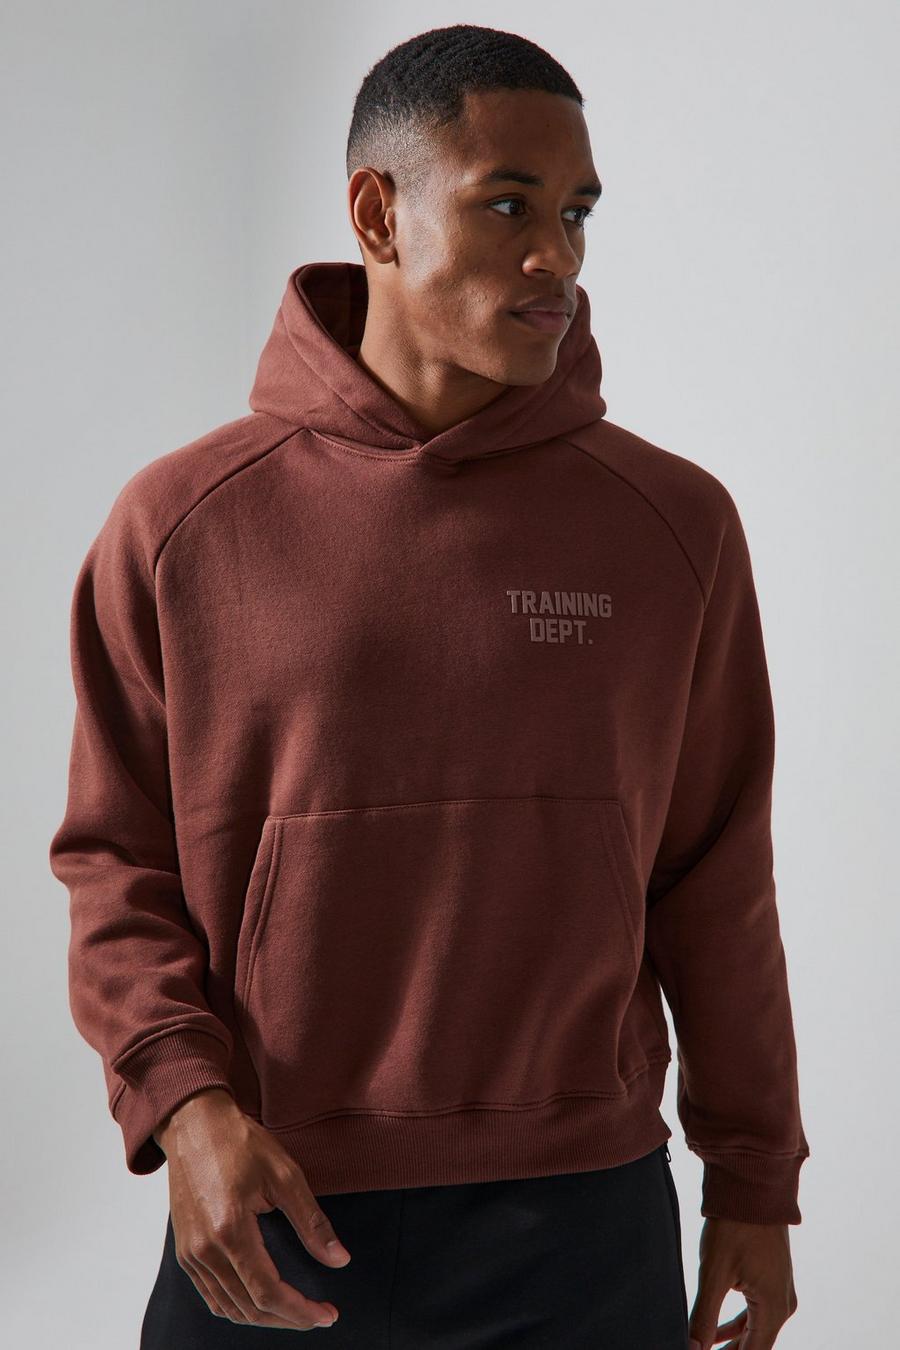 Chocolate Man Active Boxy Training Dept Hoodie image number 1